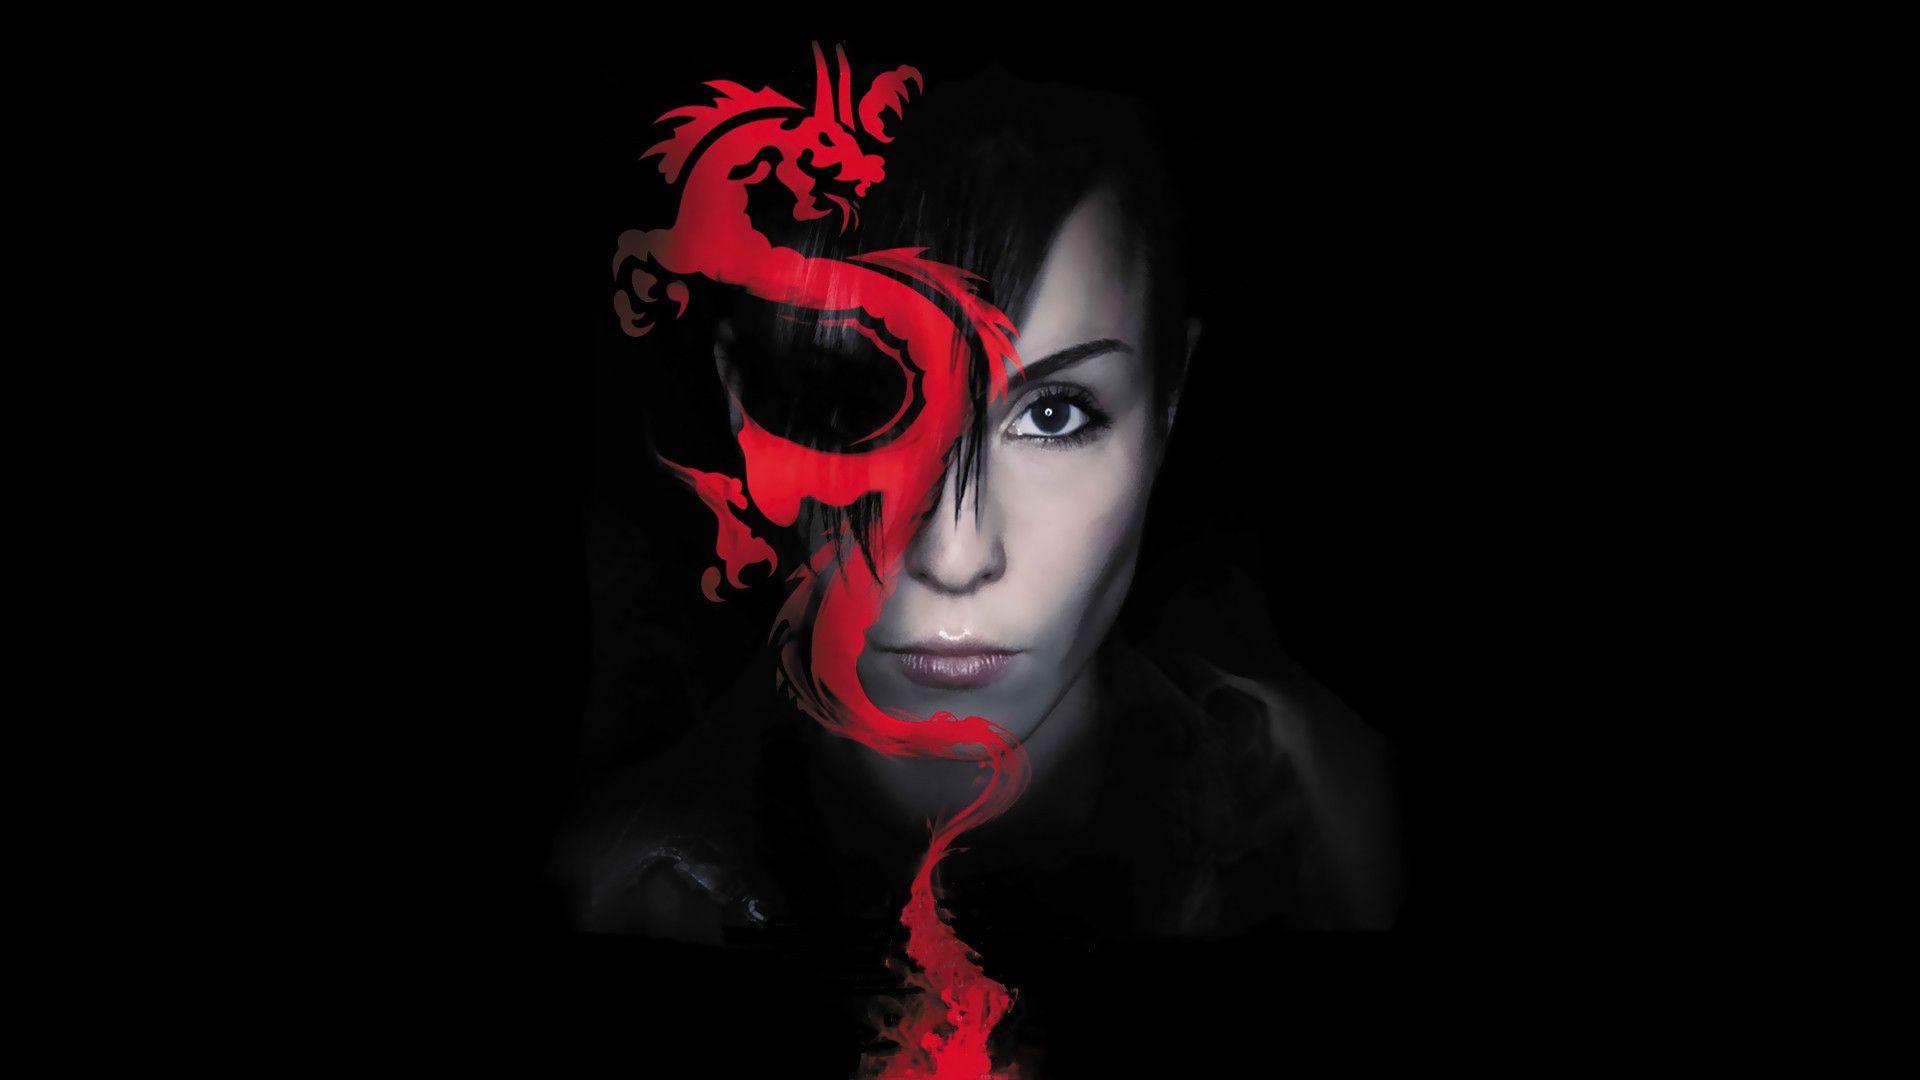 The Girl with the Dragon Tattoo Wallpaper